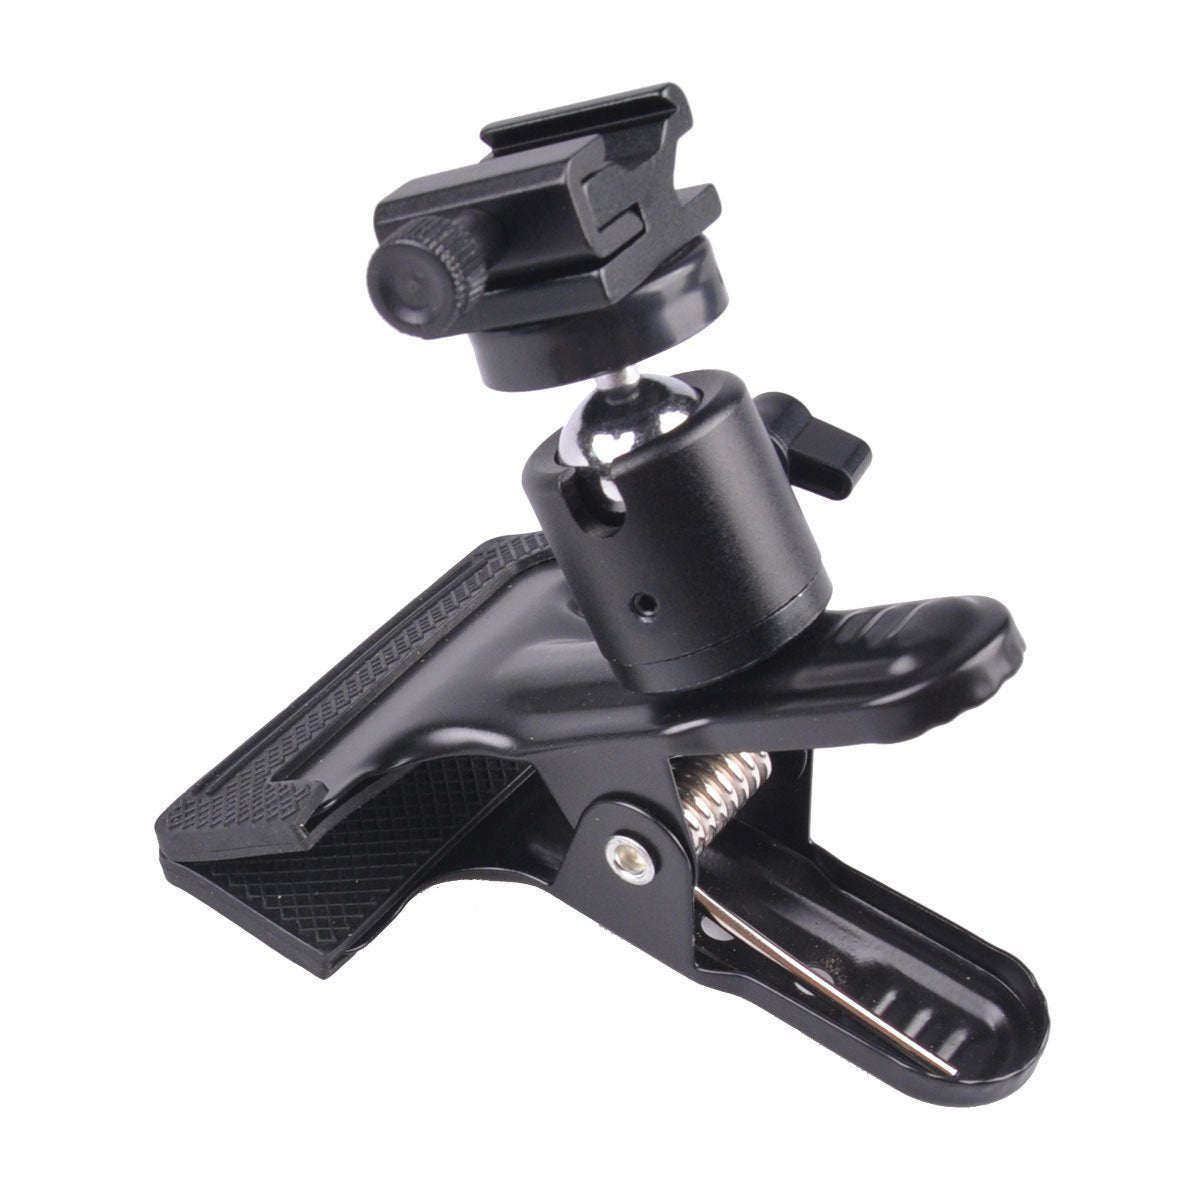 Pxel AA-CT2 Spring Clamp with Metal Ball Head with Hot Cold Shoe Mount for Speedlight Flash Microphone Camera